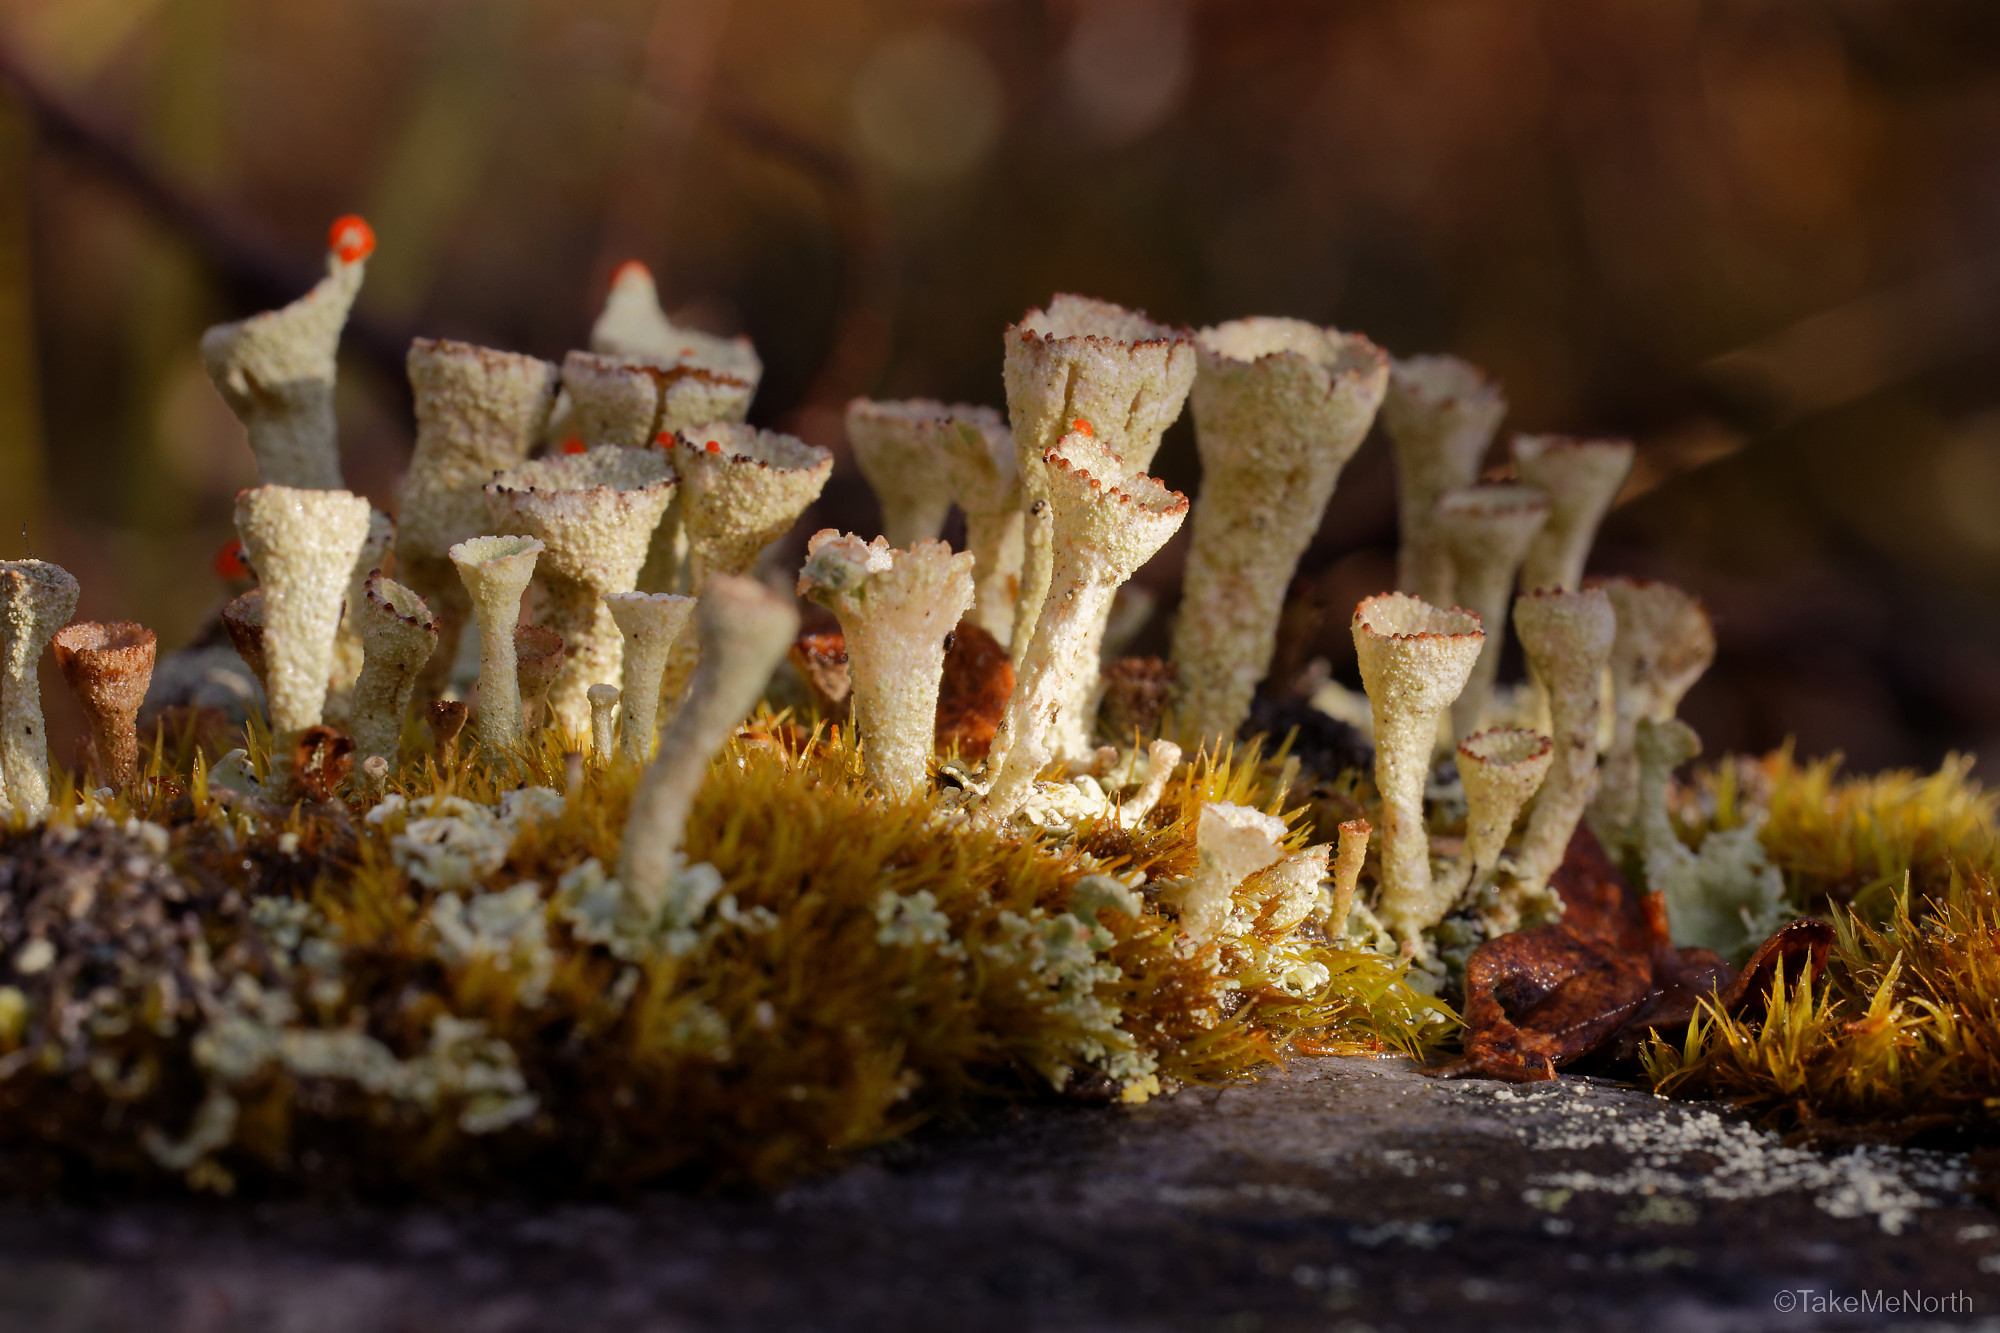 A group of Cladonia asahinae (Pixie cup lichens).